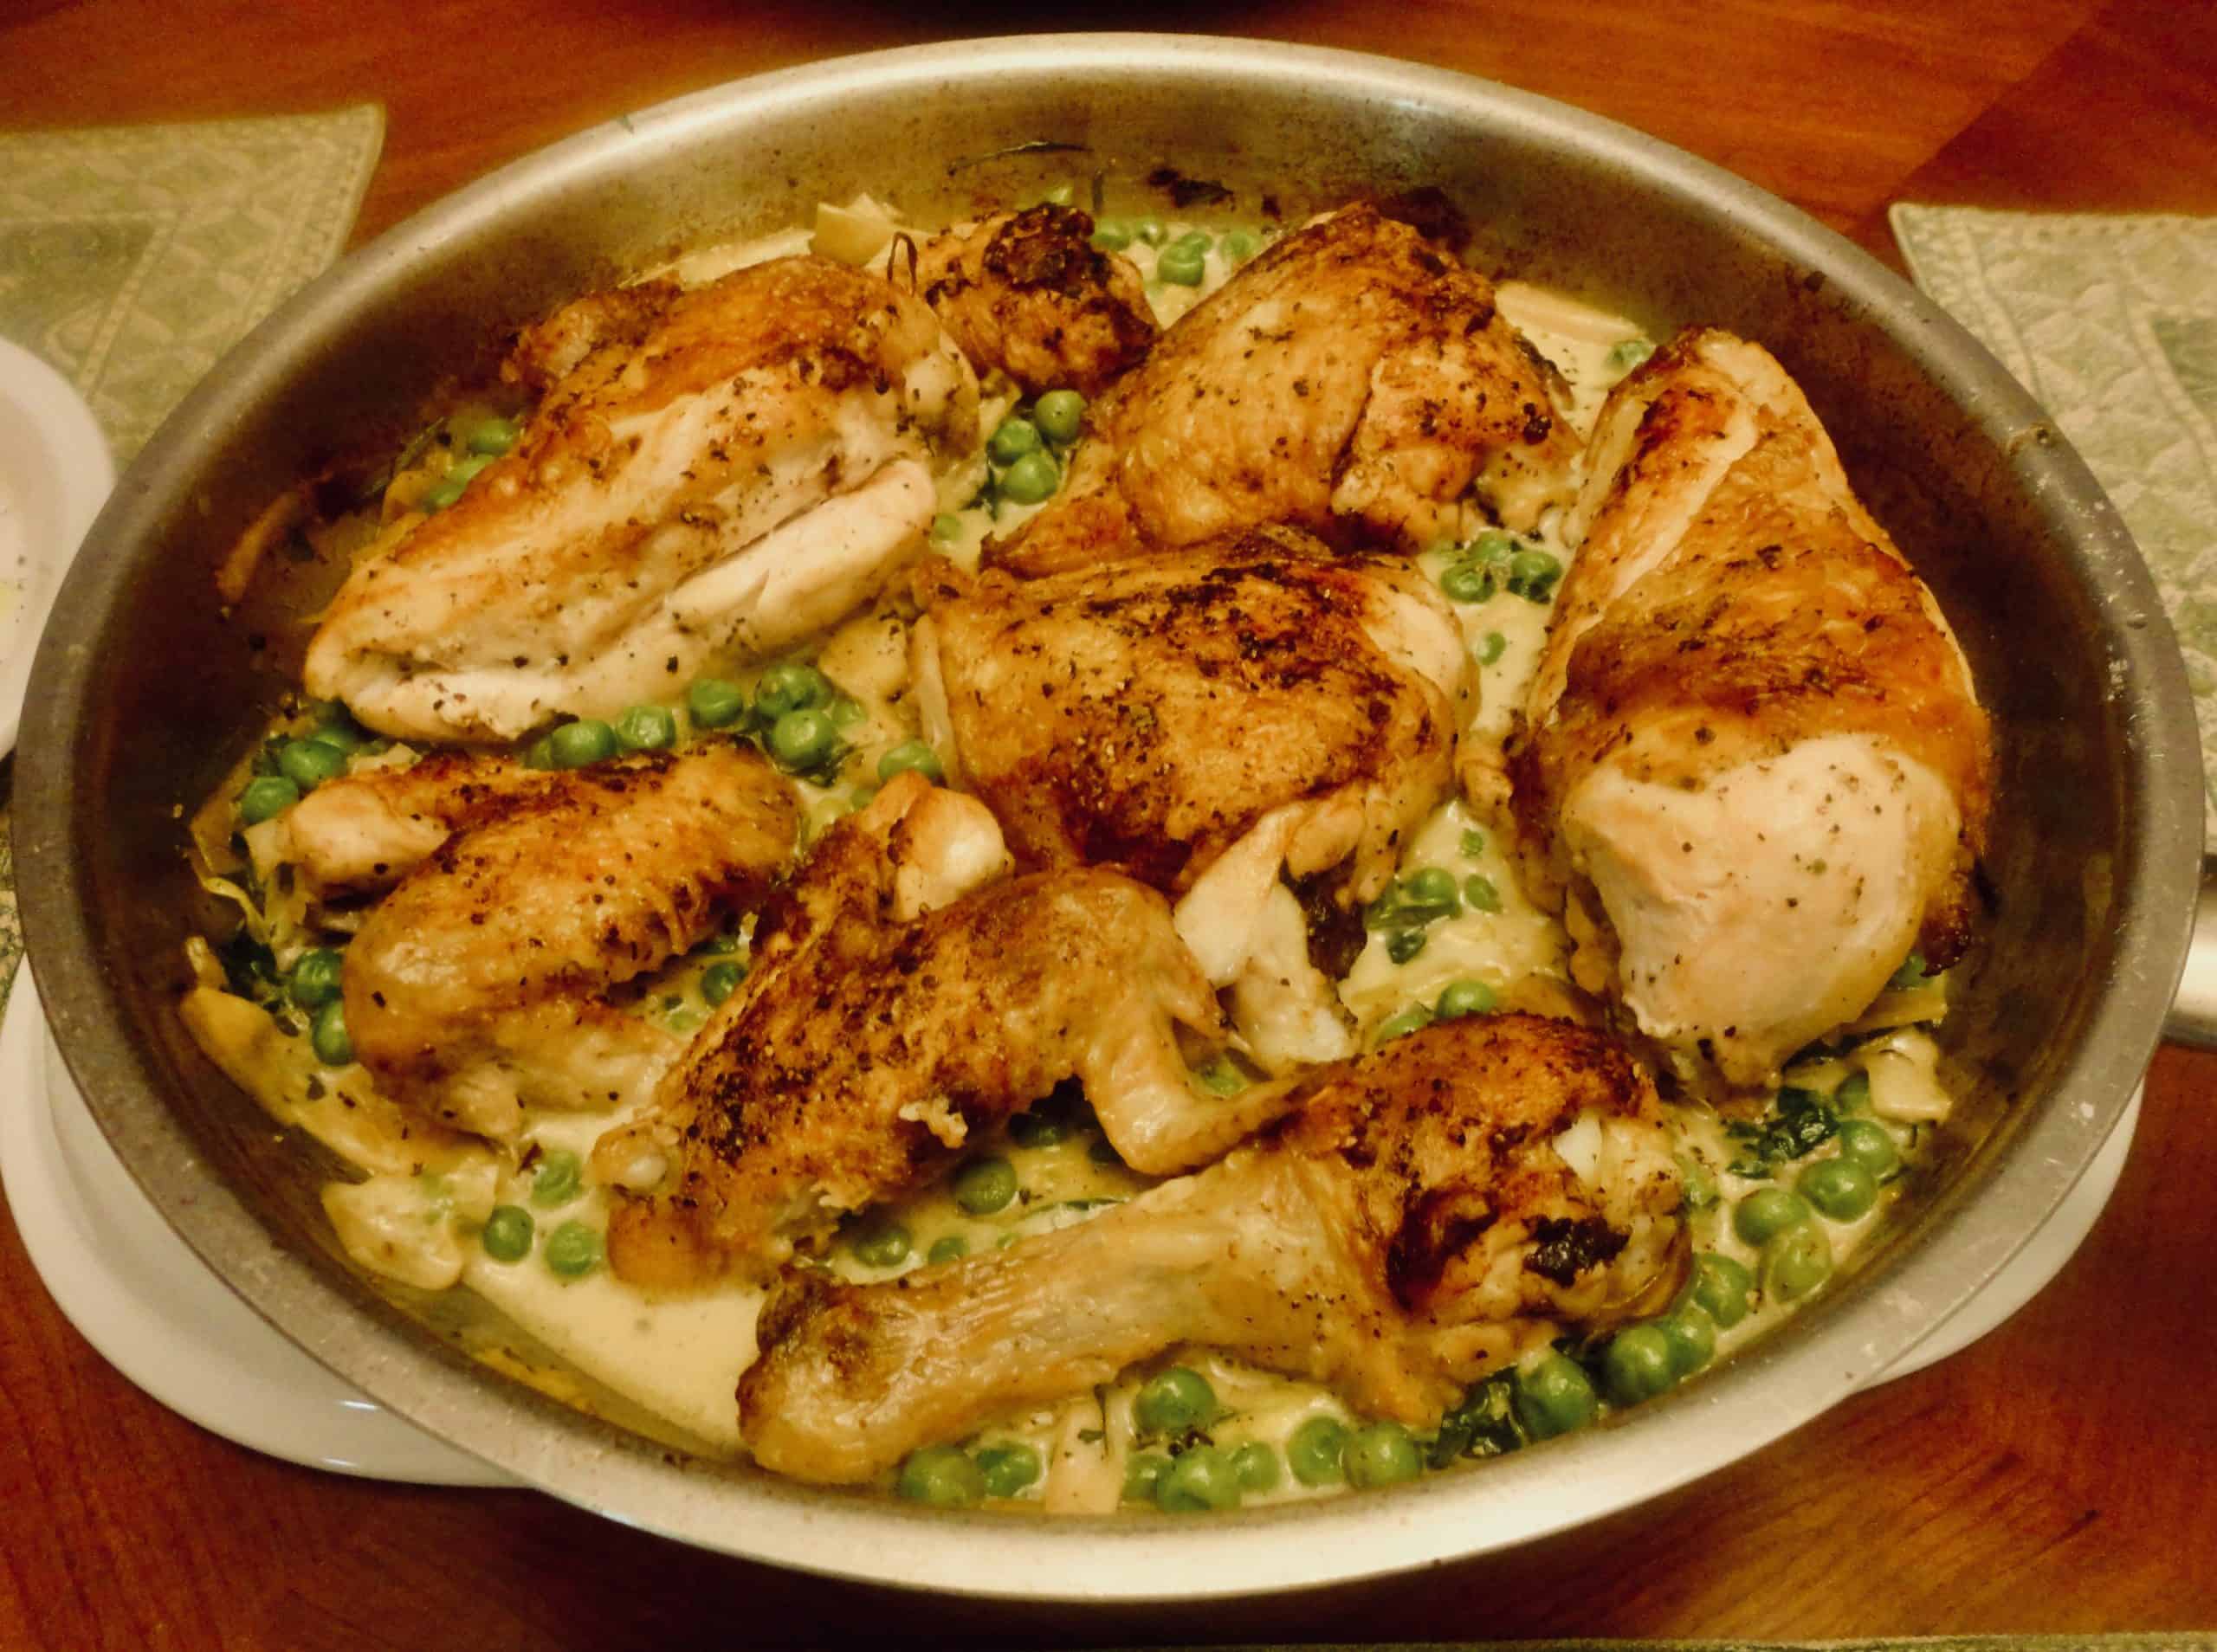 Vinegar-Braised Chicken on a bed of Leeks and Peas adapted from Grace Parisi of Food and Wine Magazine with Heirloom Tomatoes and Burrata